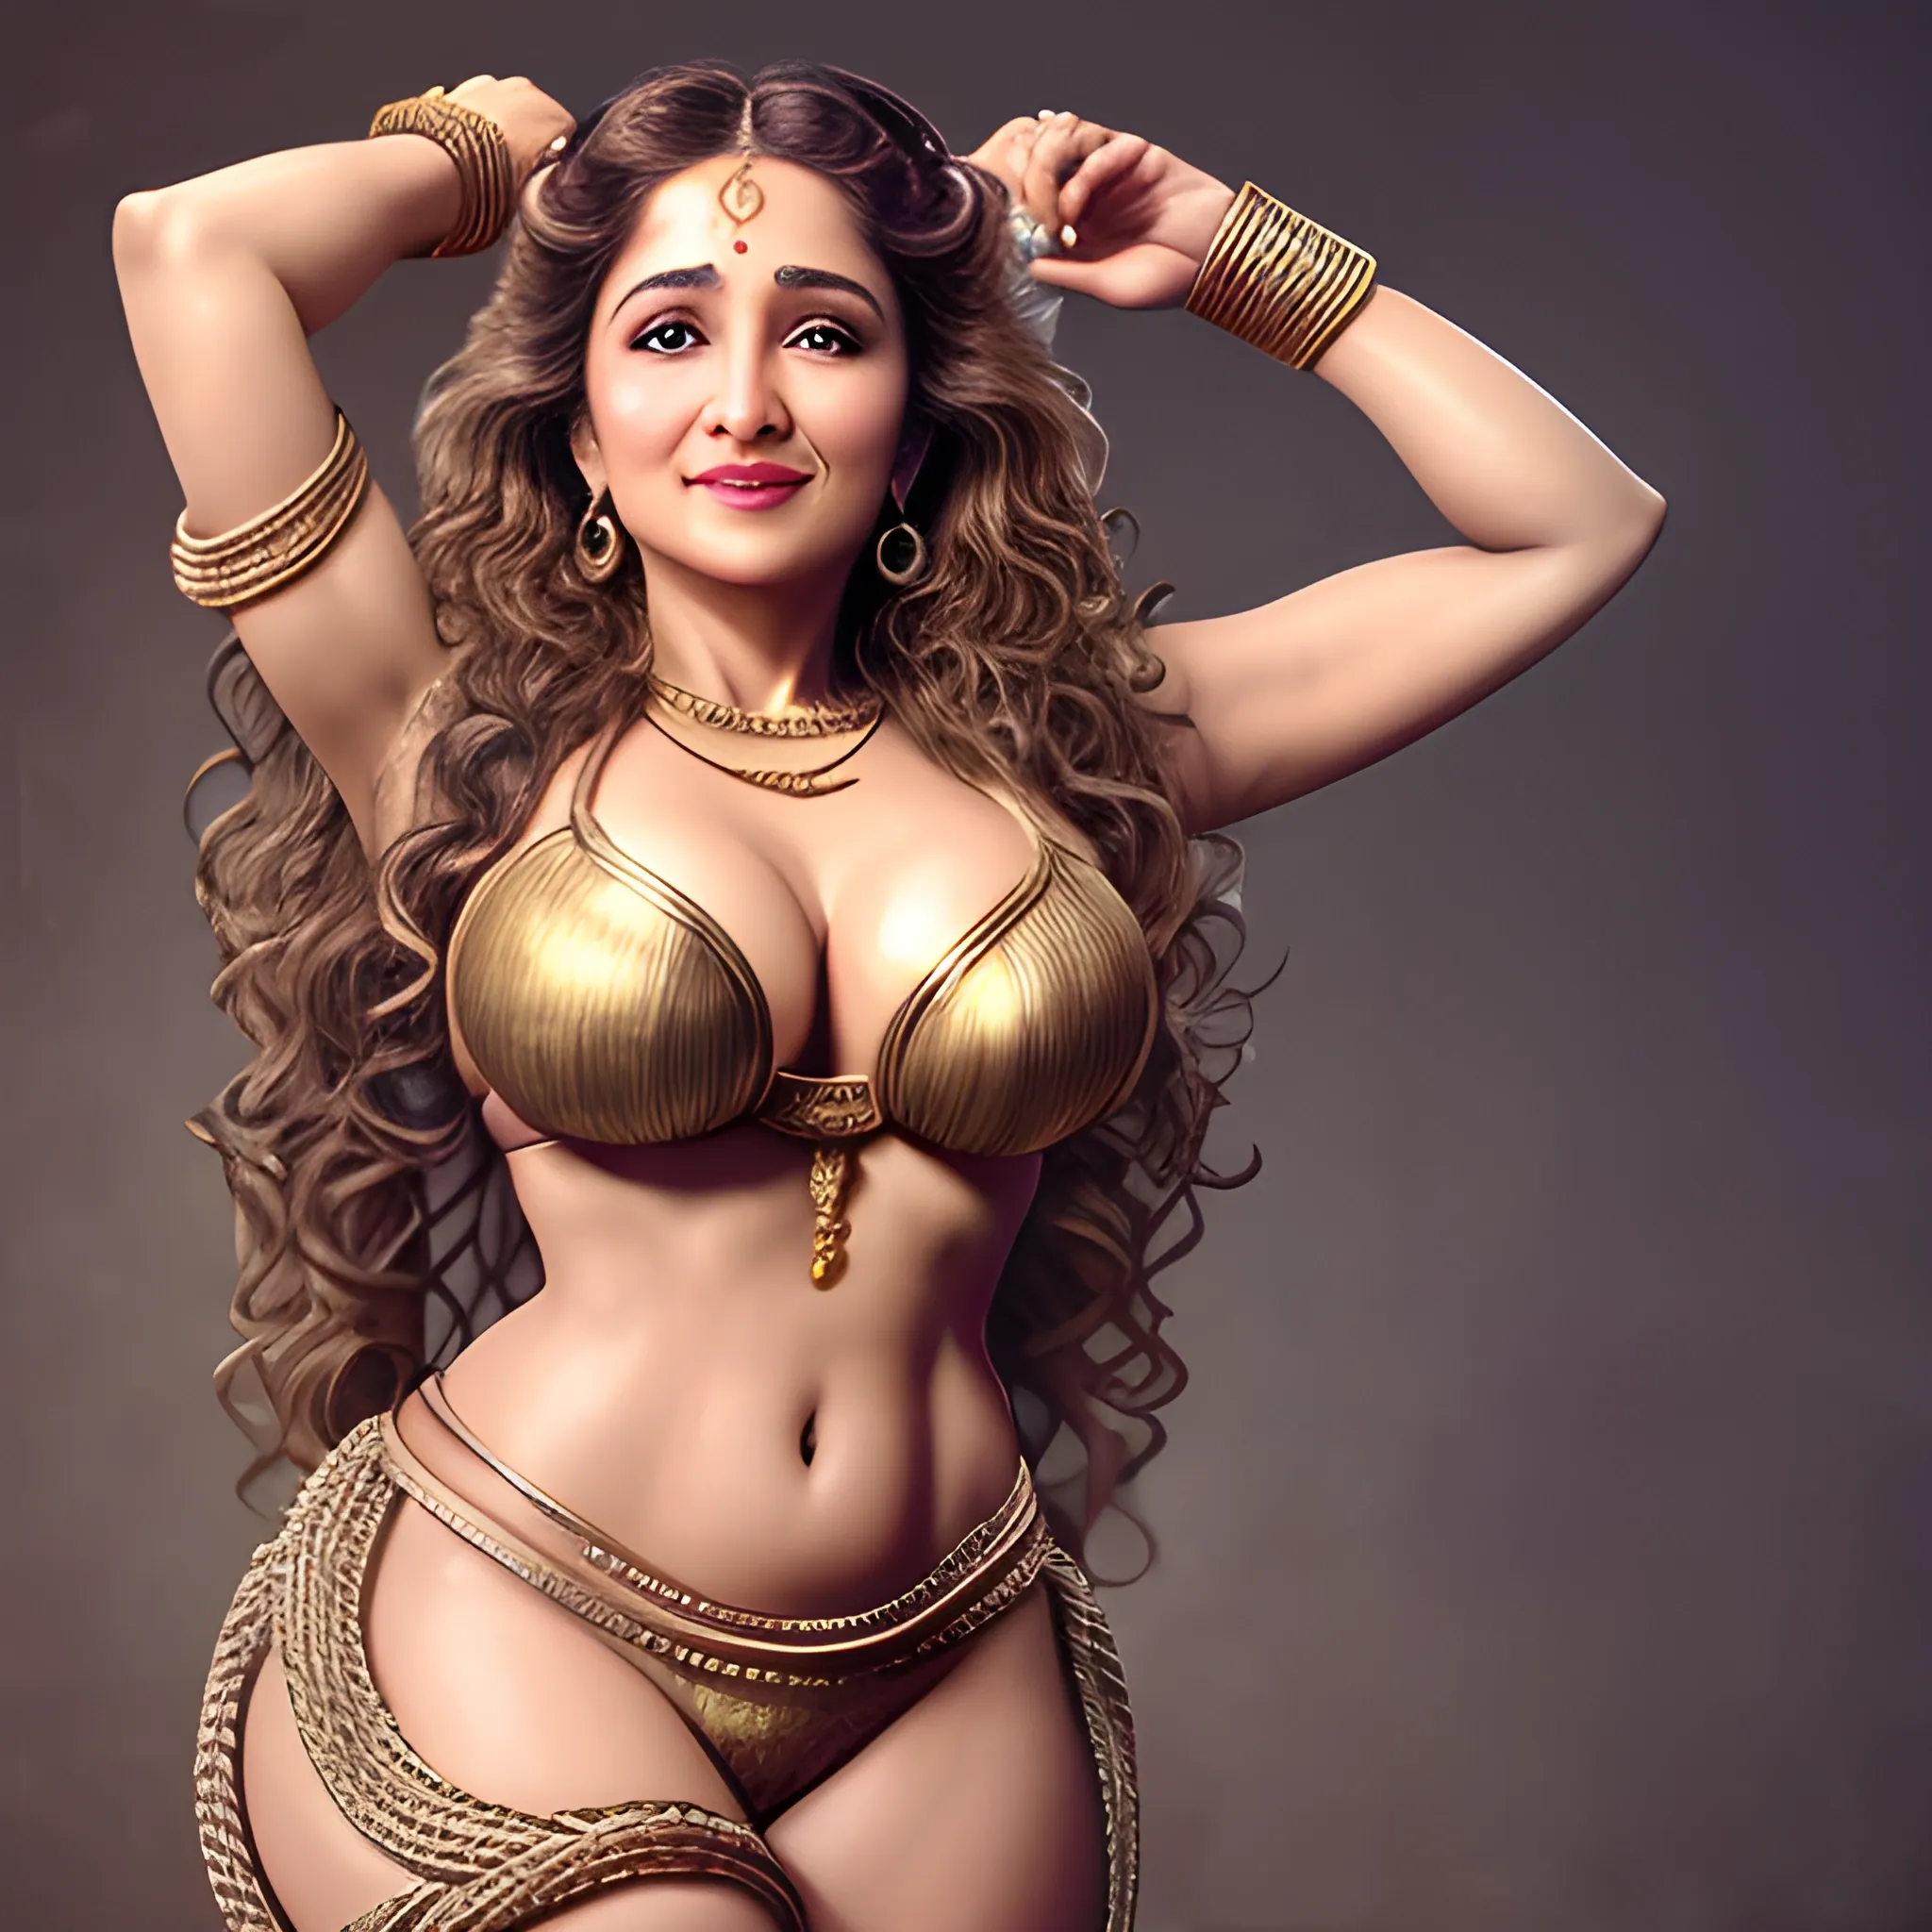  messy long and wavy hair Madhuri Dixit babe in slave leia costume with abs highly detailed masterpiece 4k with a hot expression heavy makeup slave model face high cheekbones very big thighs SFW hyper realistic chained tik tok dance